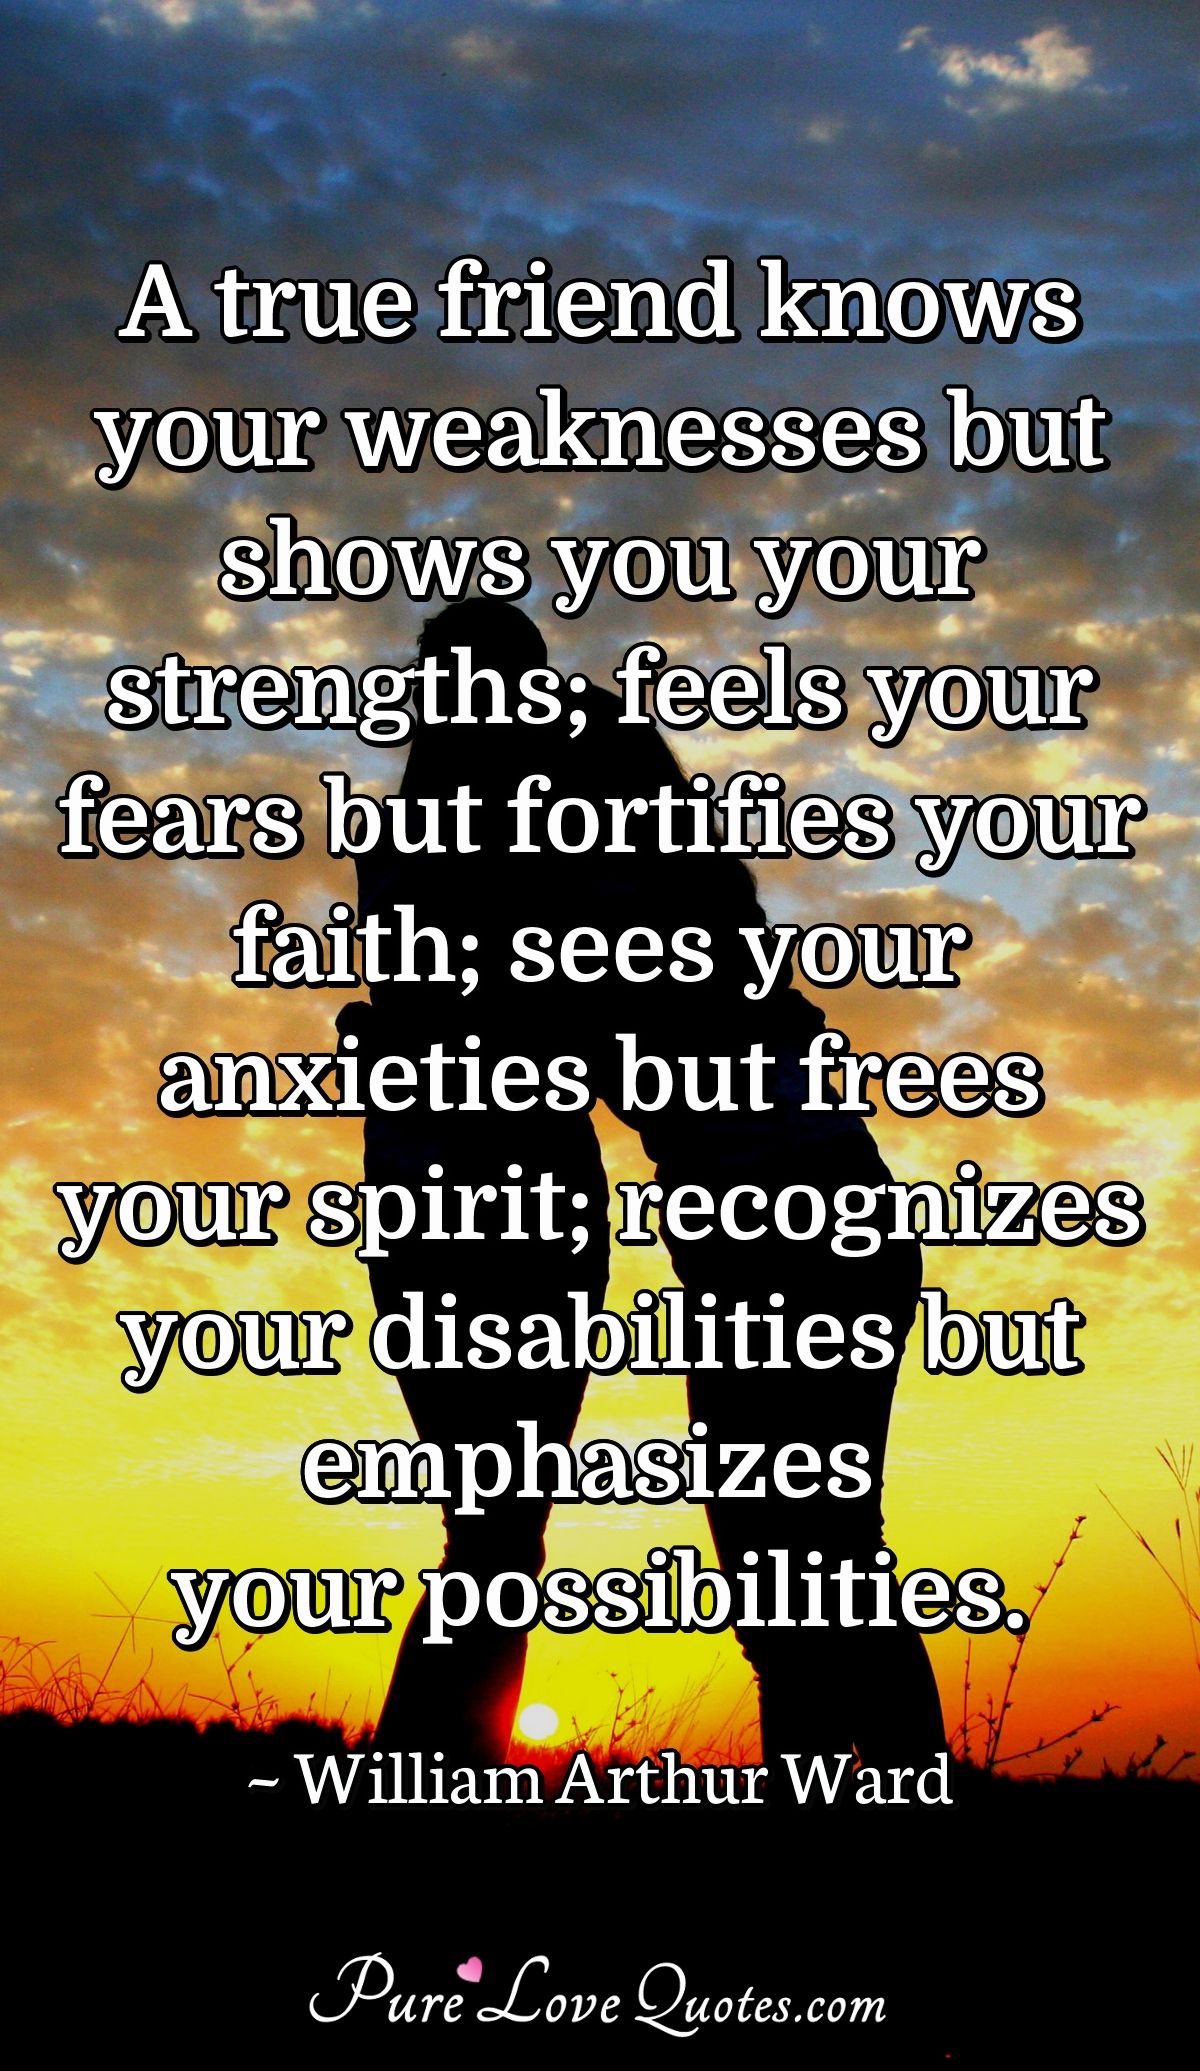 A true friend knows your weaknesses but shows you your strengths; feels your fears but fortifies your faith; sees your anxieties but frees your spirit; recognizes your disabilities but emphasizes your possibilities. - William Arthur Ward